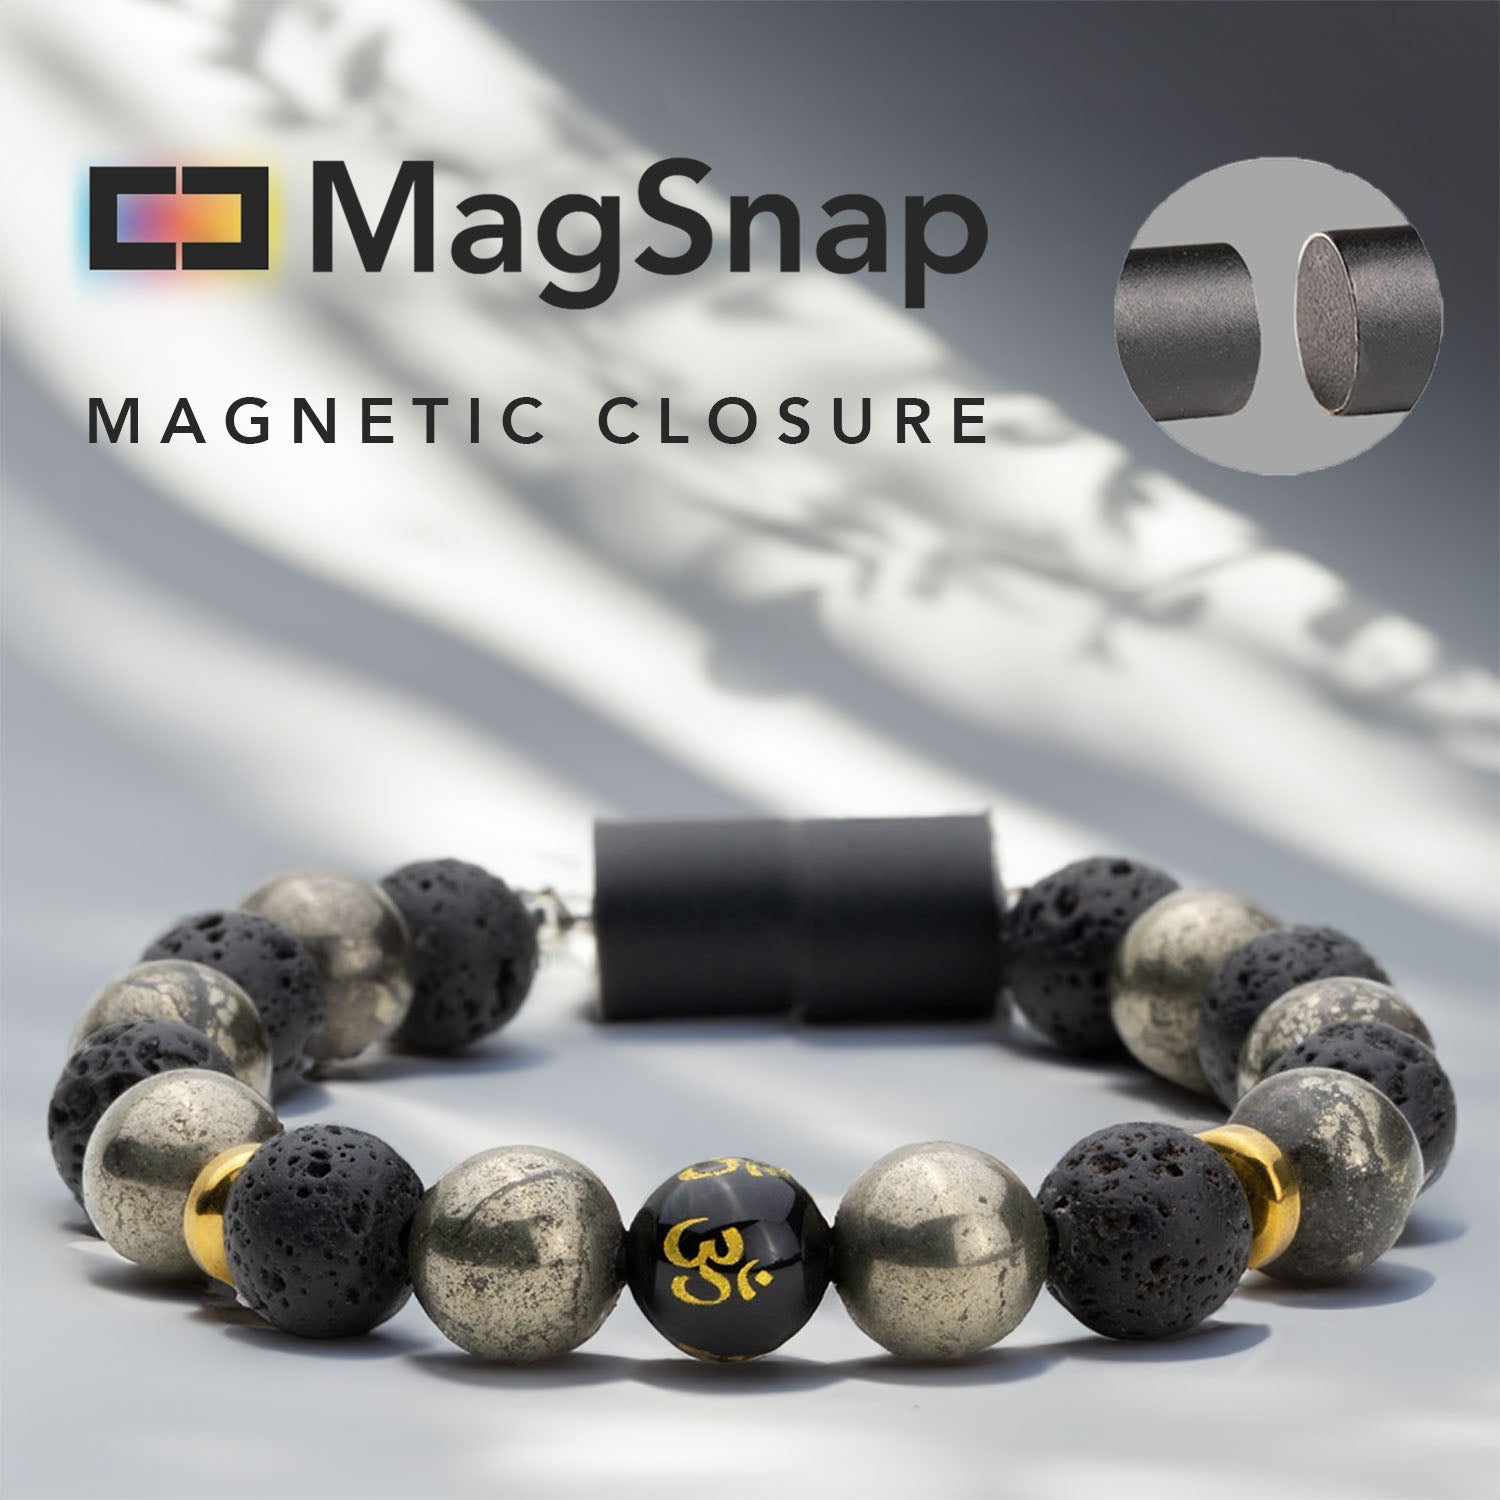 Natural Stone Jewellery Spiritual Pyrite Natural Stone OM Bracelet With Magsnap